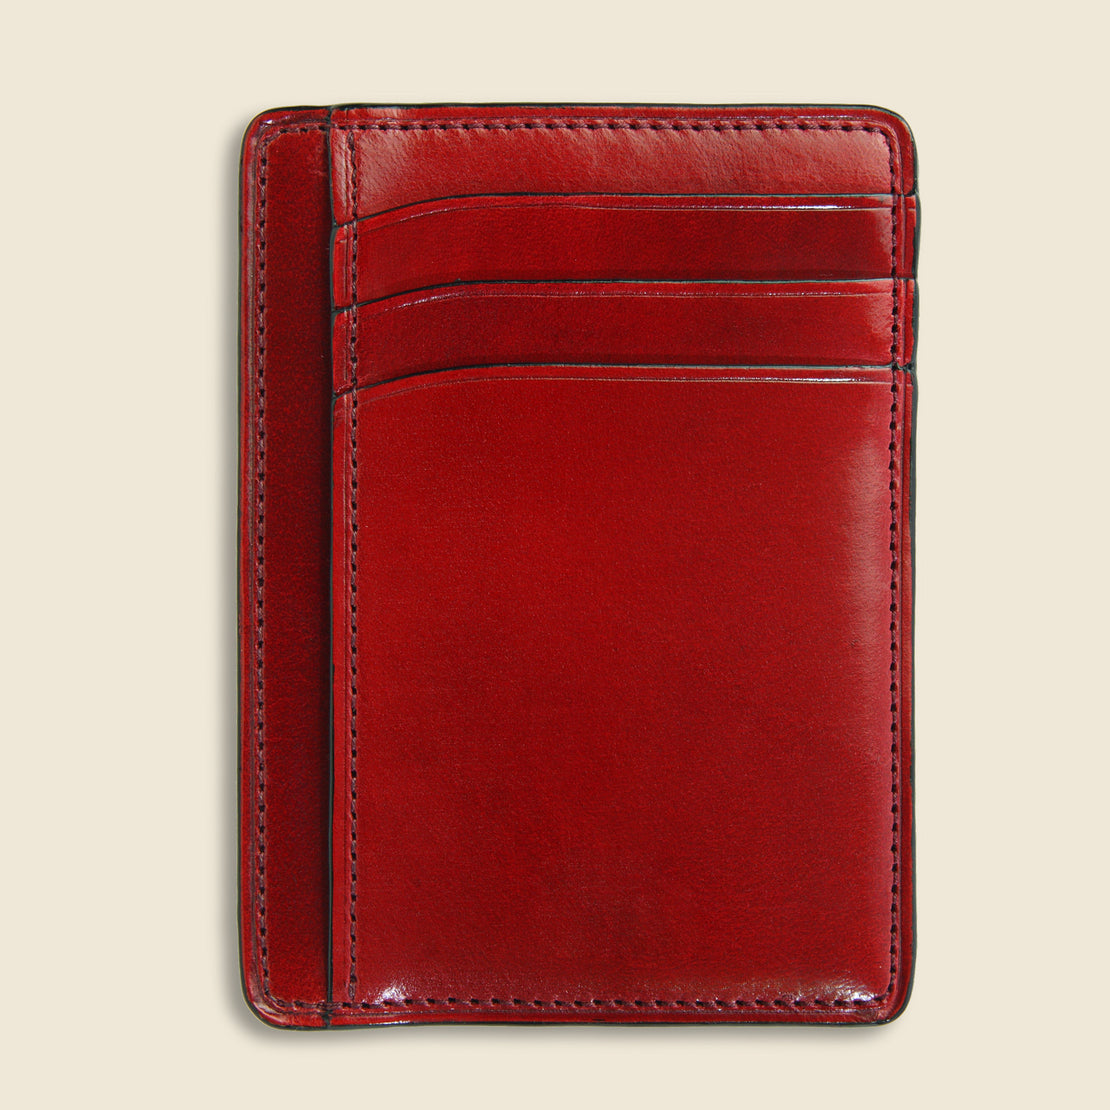 Card and Document Case - Cherry - Il Bussetto - STAG Provisions - Accessories - Wallets